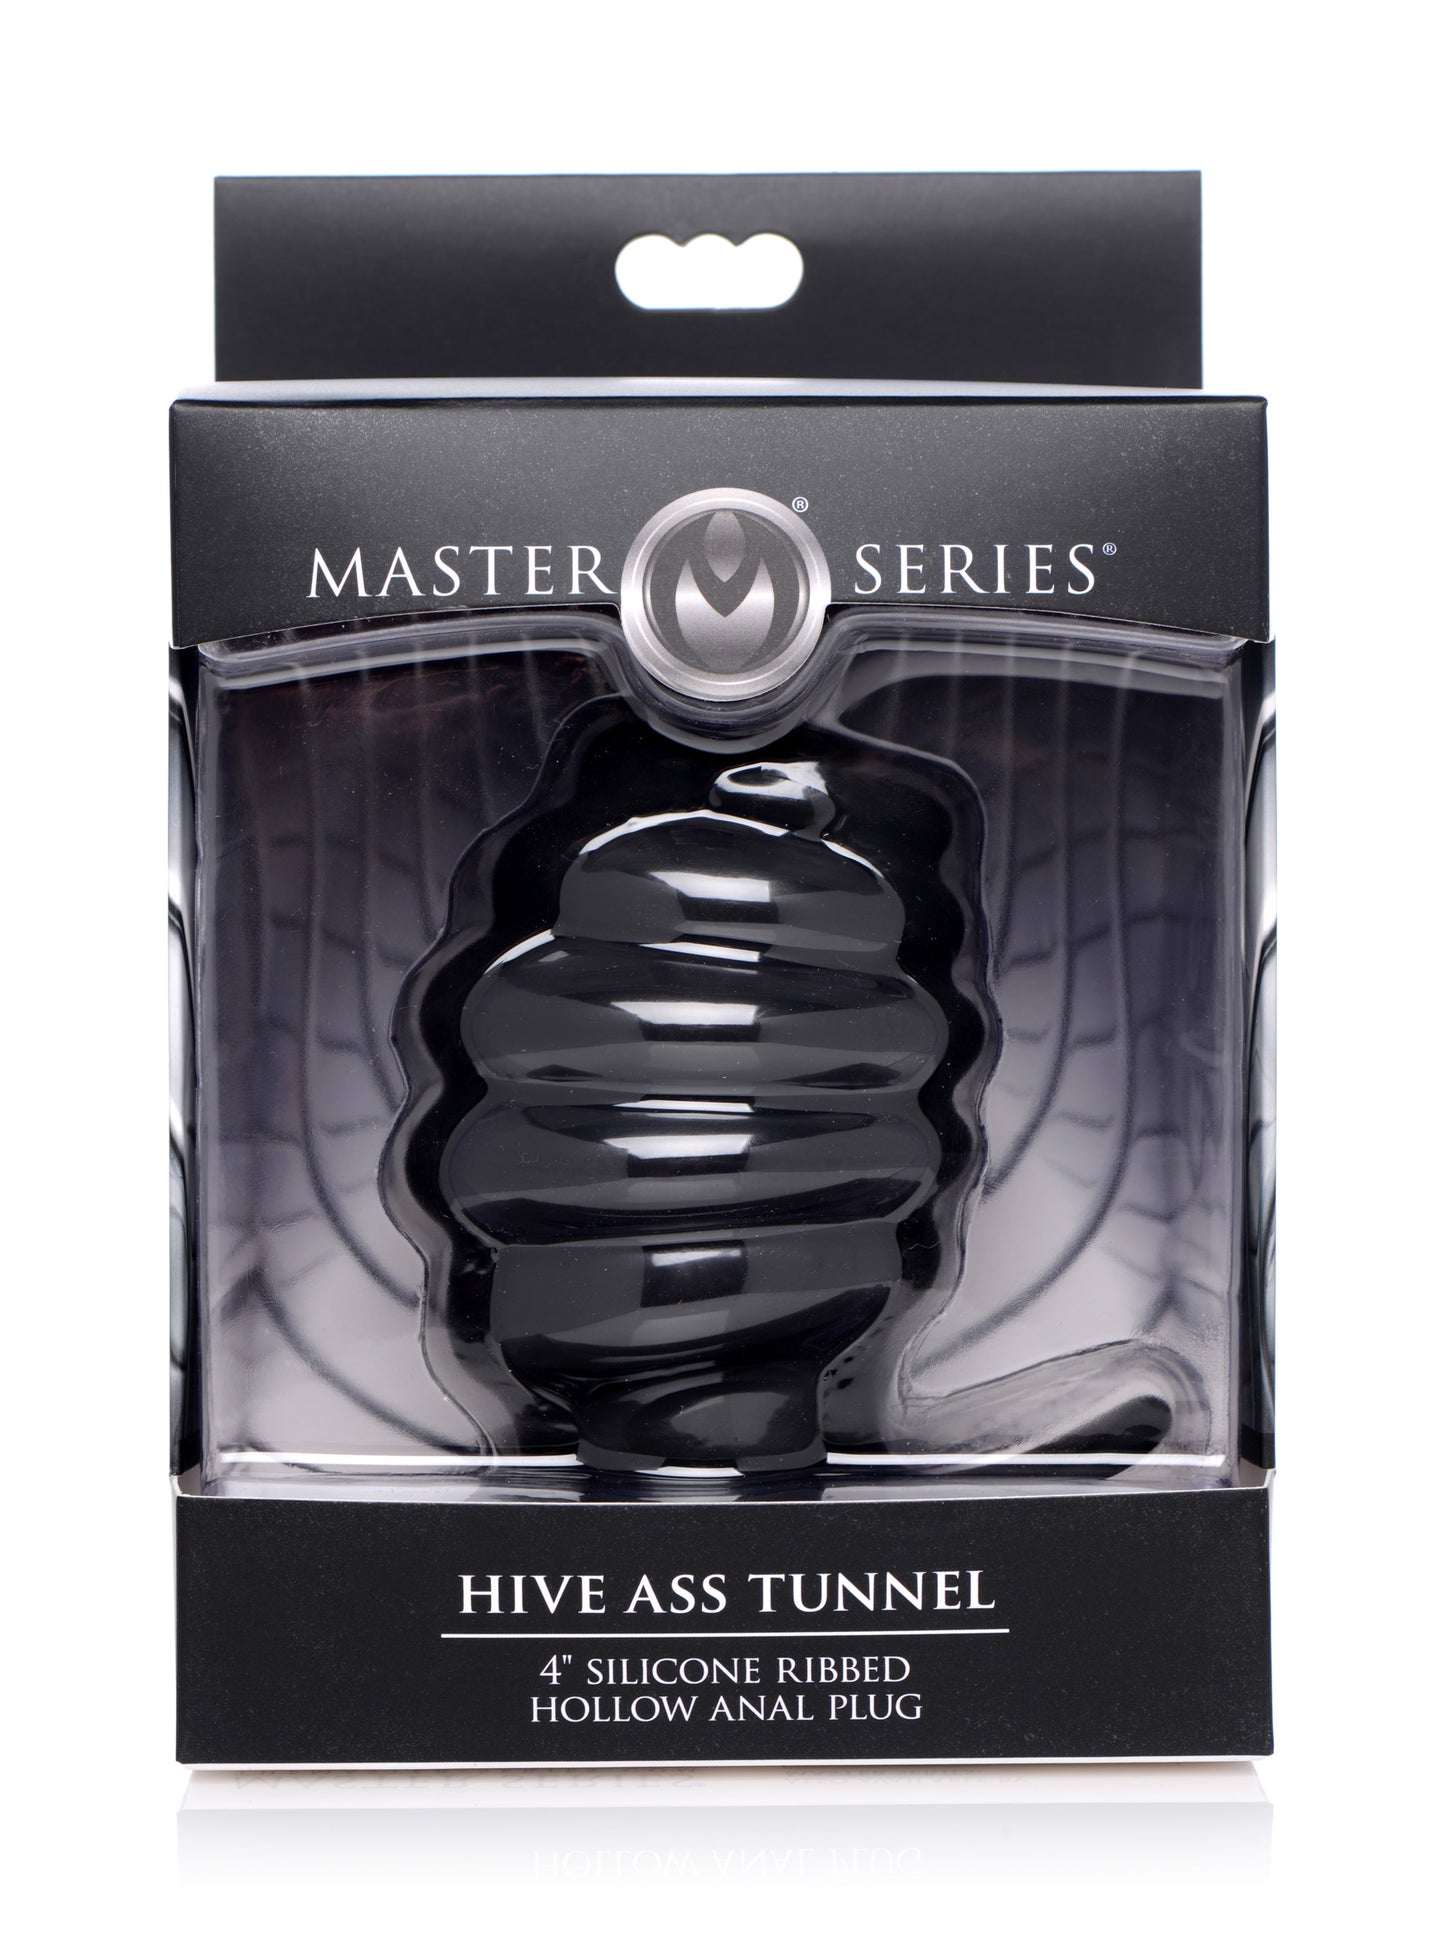 Hive Ass Tunnel Silicone Ribbed Hollow Anal Plug - Large - UABDSM